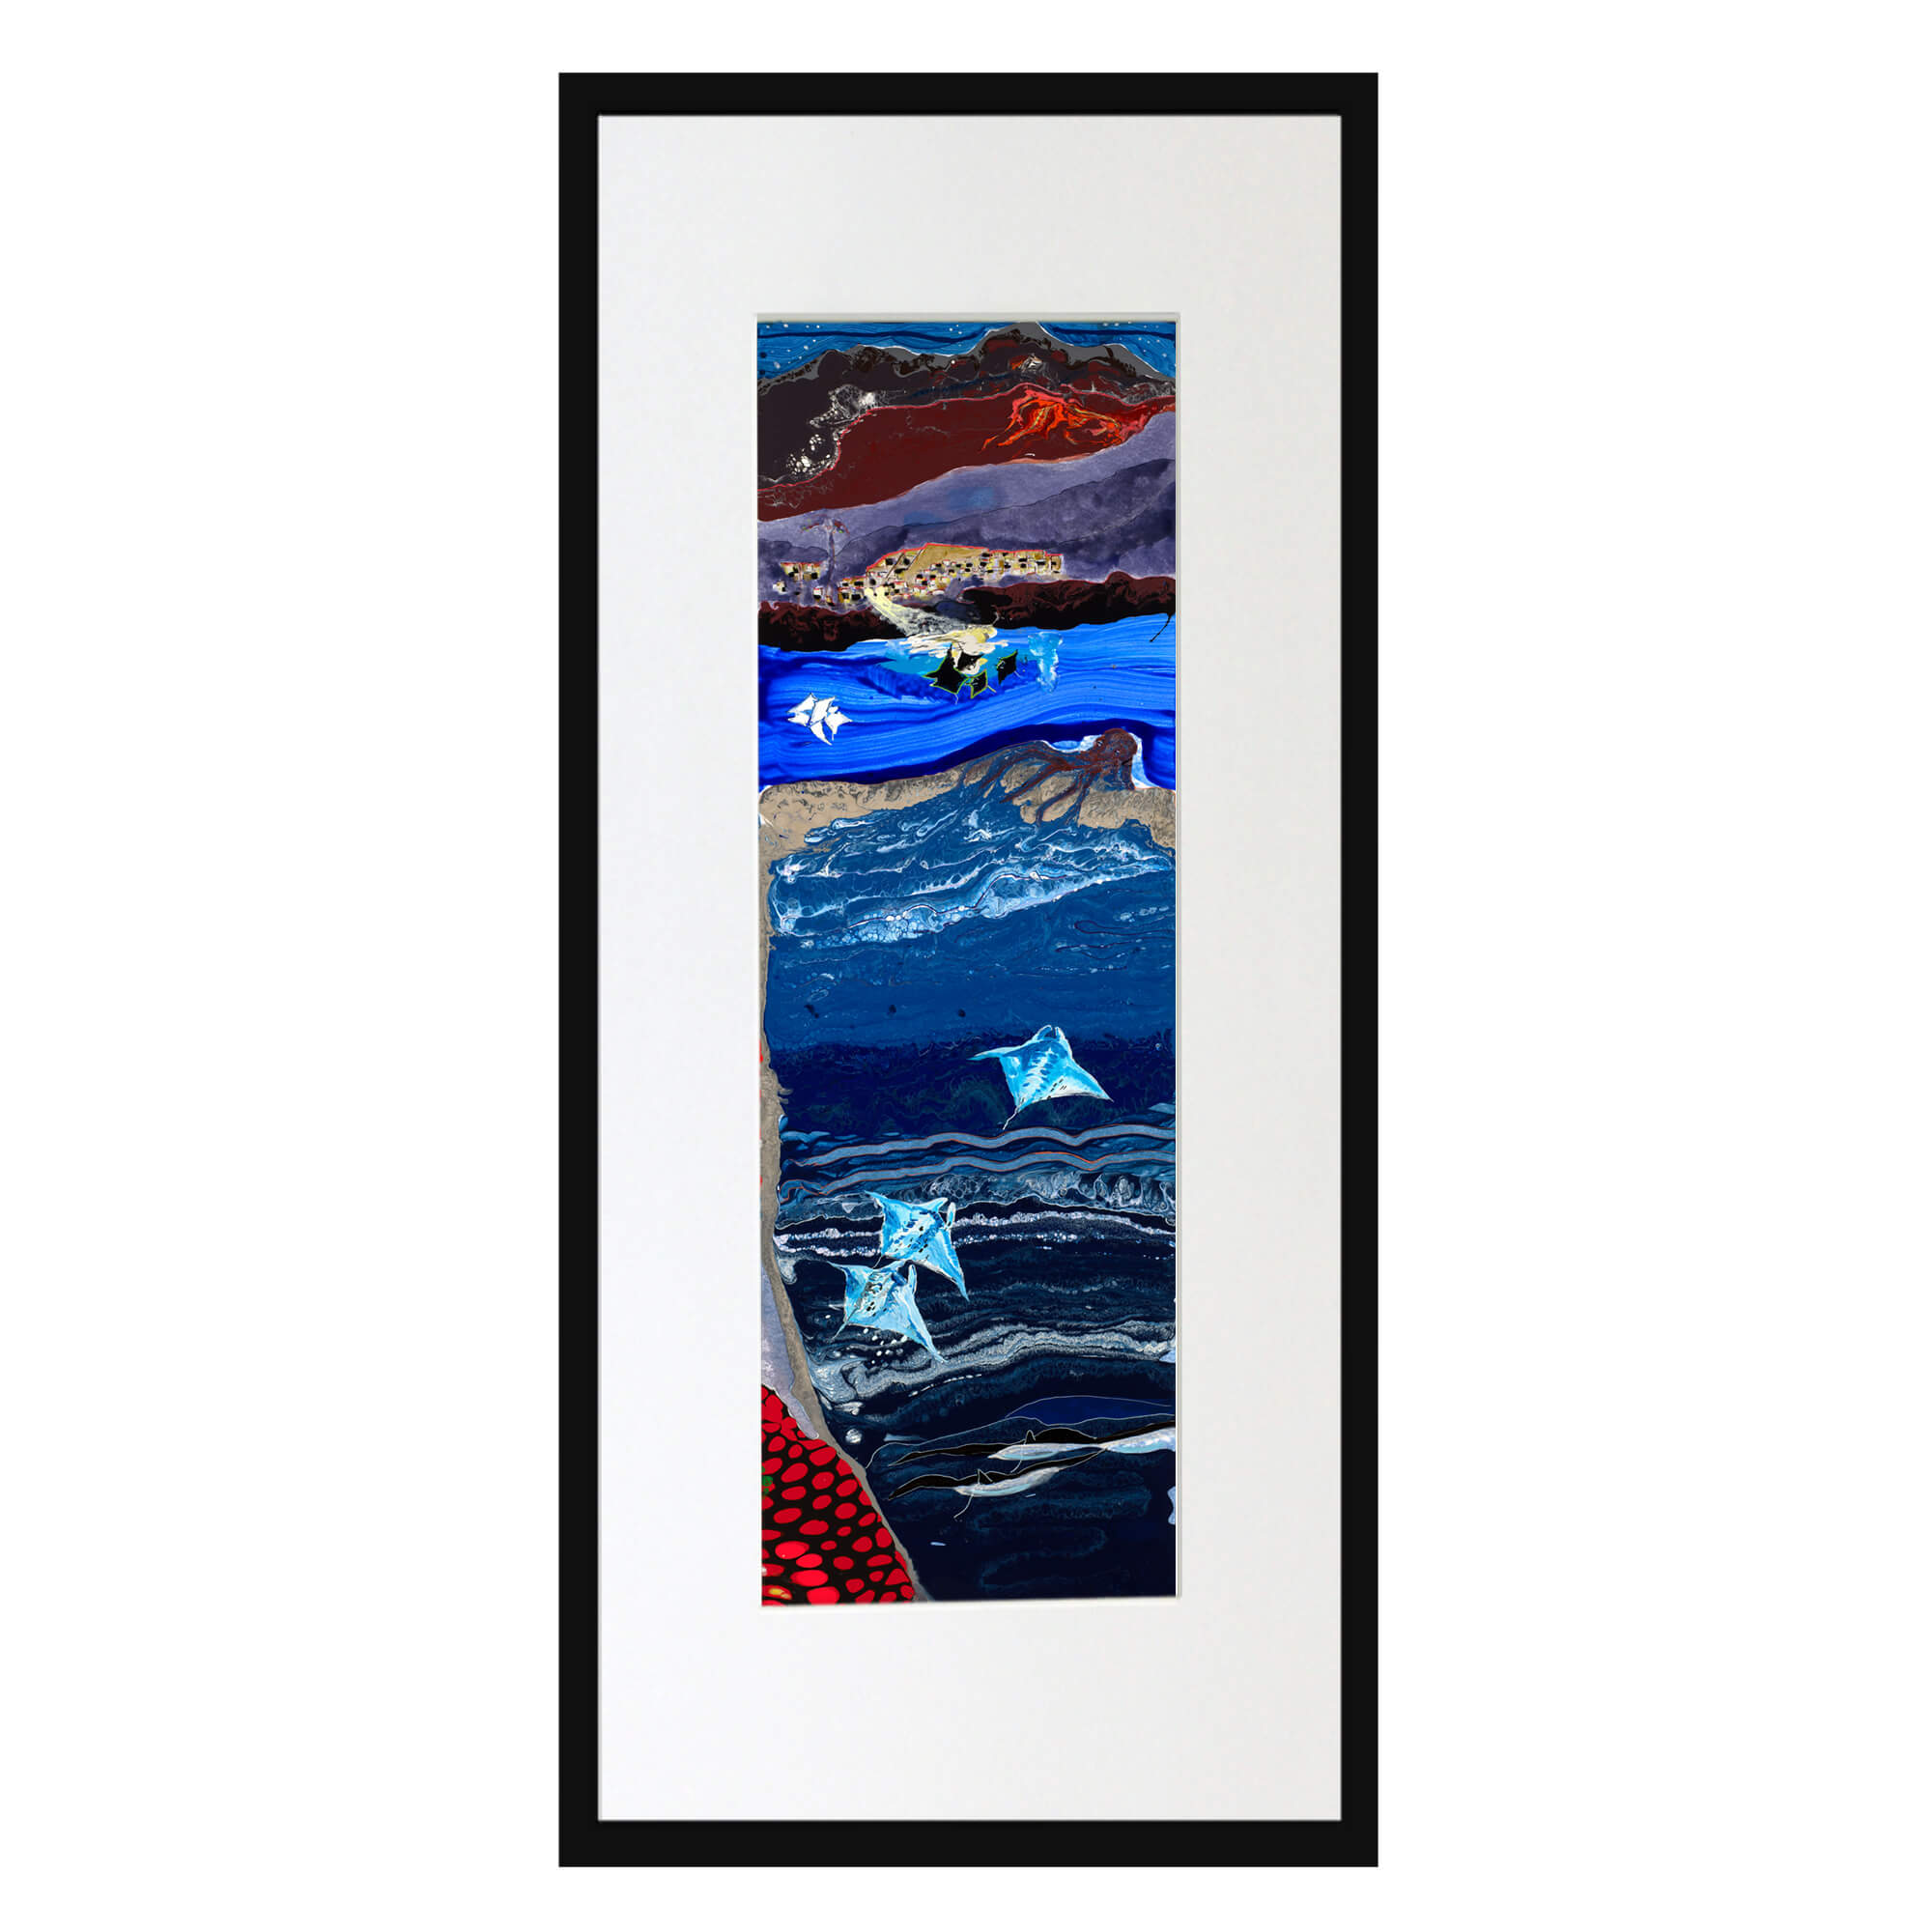 Matted art print with black frame showcasing the different shades of blue beneath the surface by hawaii artist robert hazzard